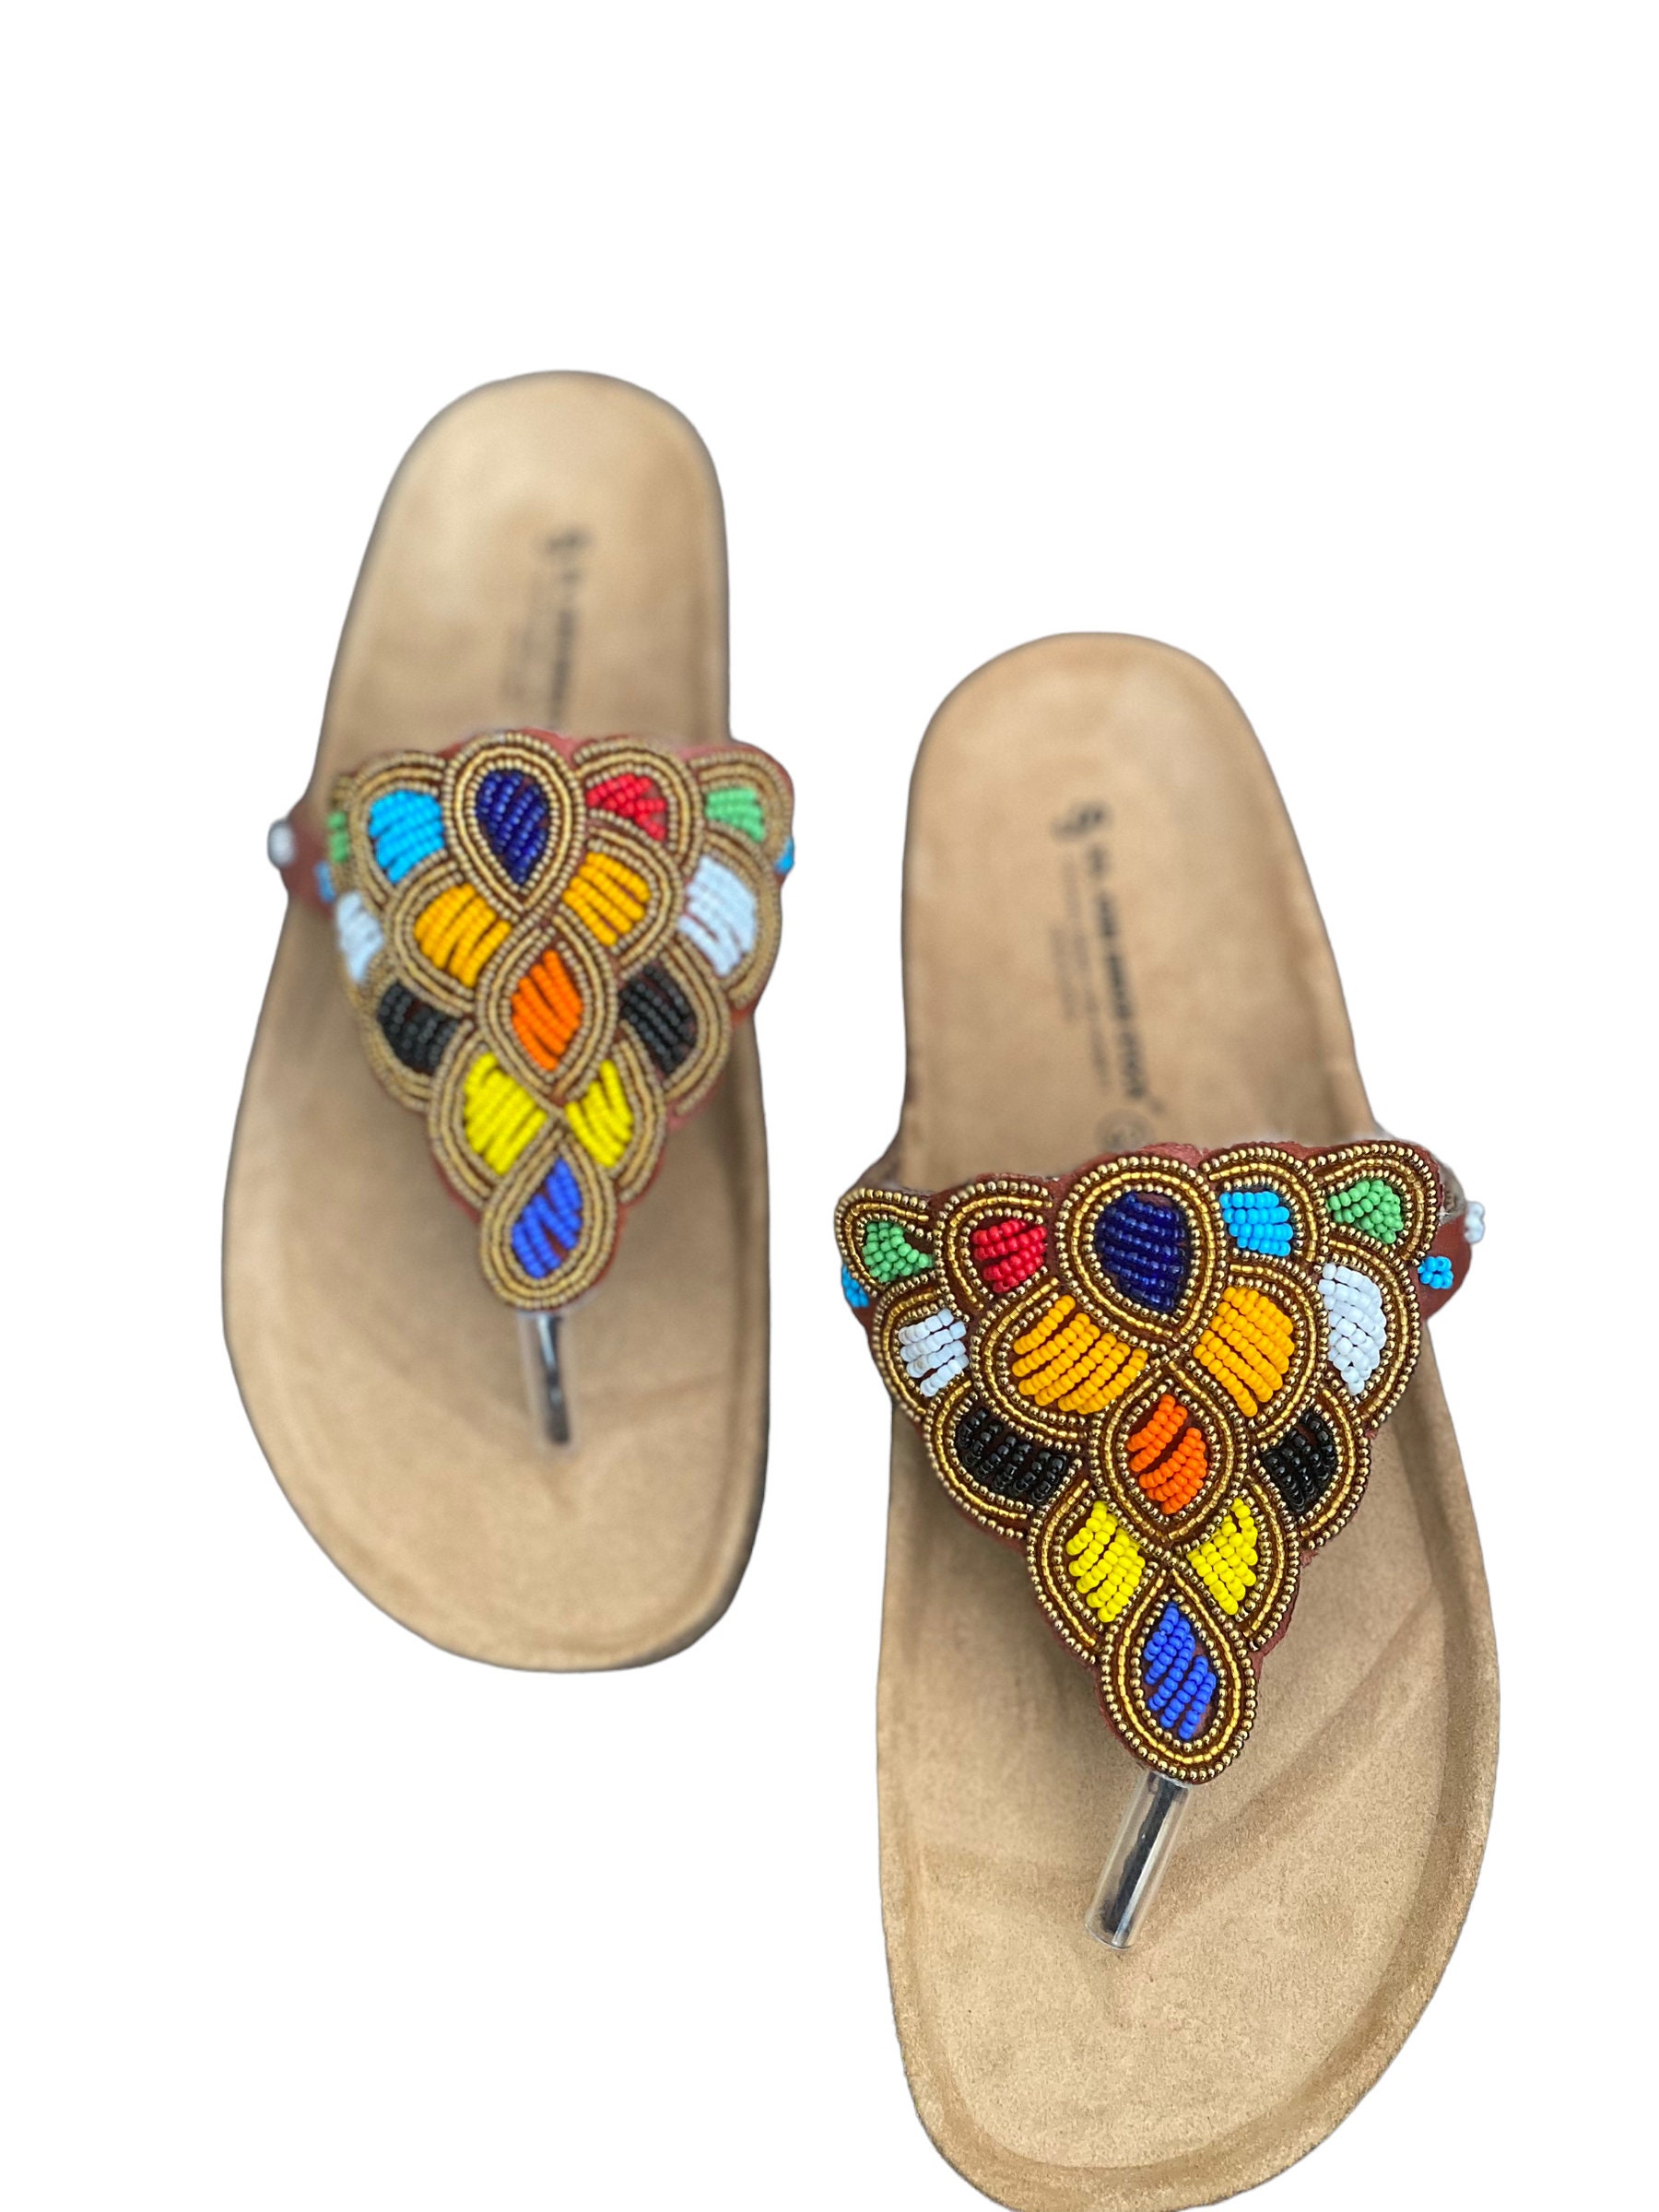 ON SALE African Summer Sandals Masai Beaded Sandals African - Etsy